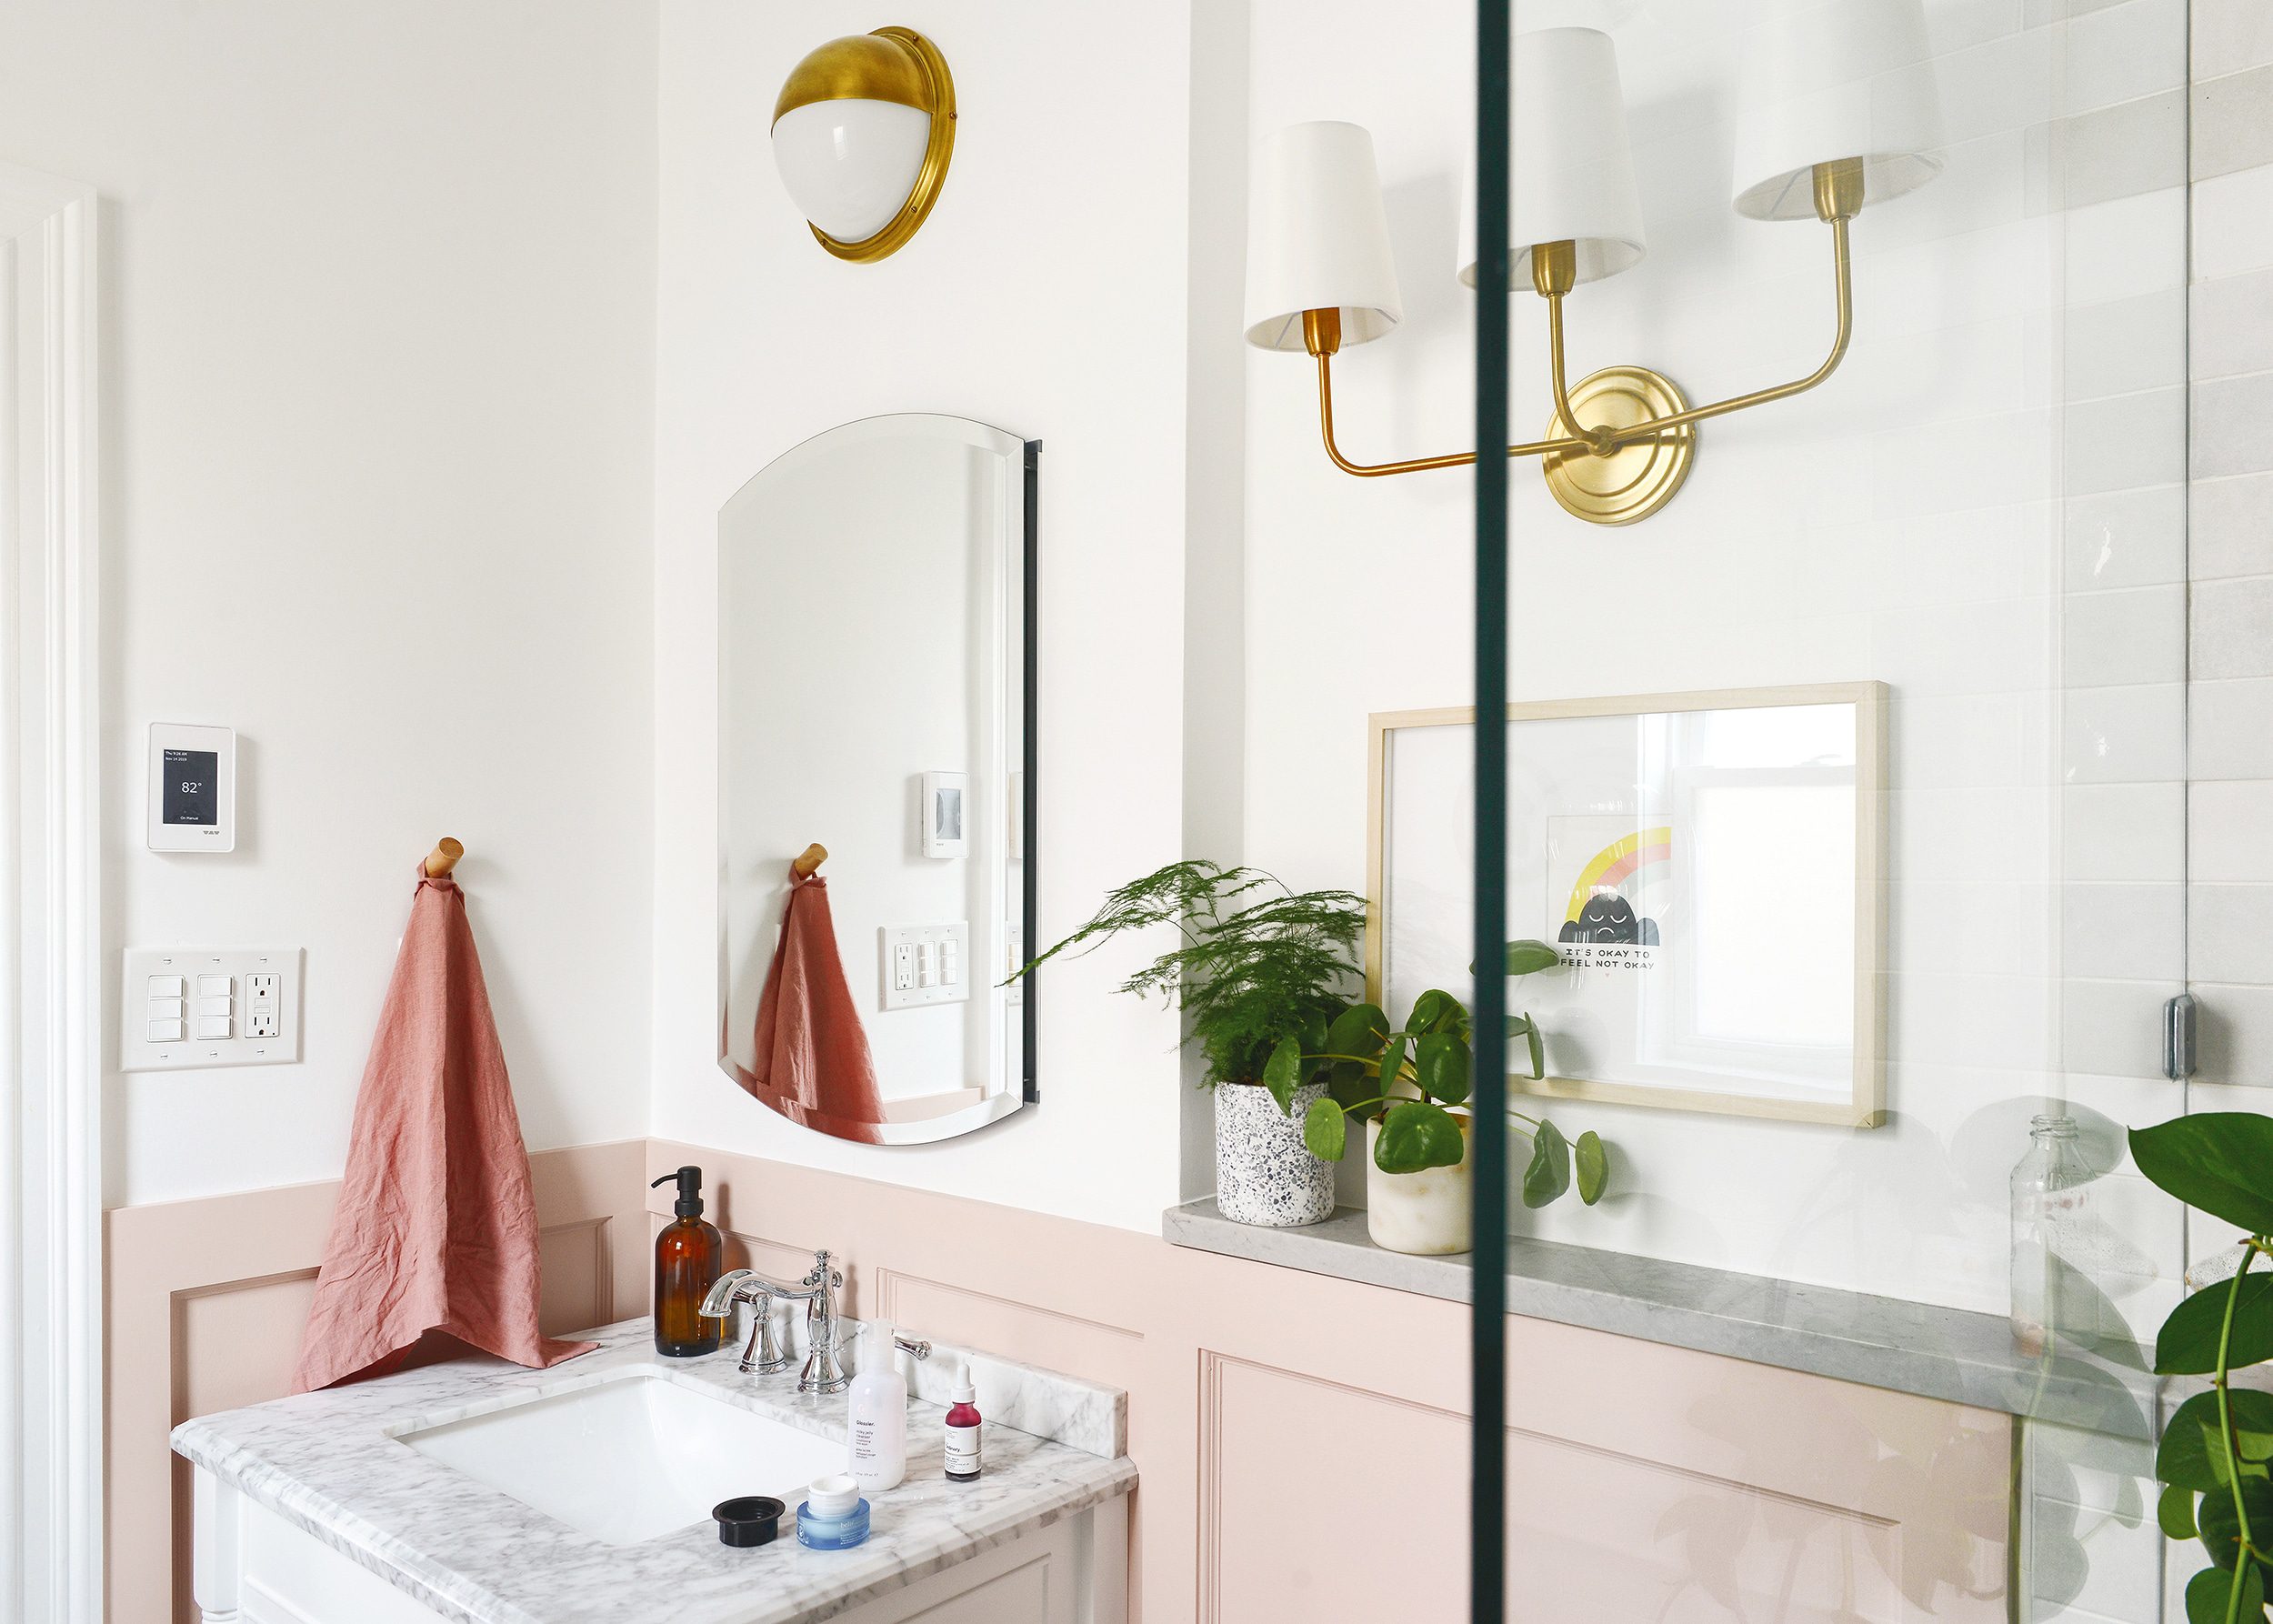 Our Chicago bathroom featuring pink board and batten, marble vanity top on a white vanity and brass light fixtures // via Yellow Brick Home